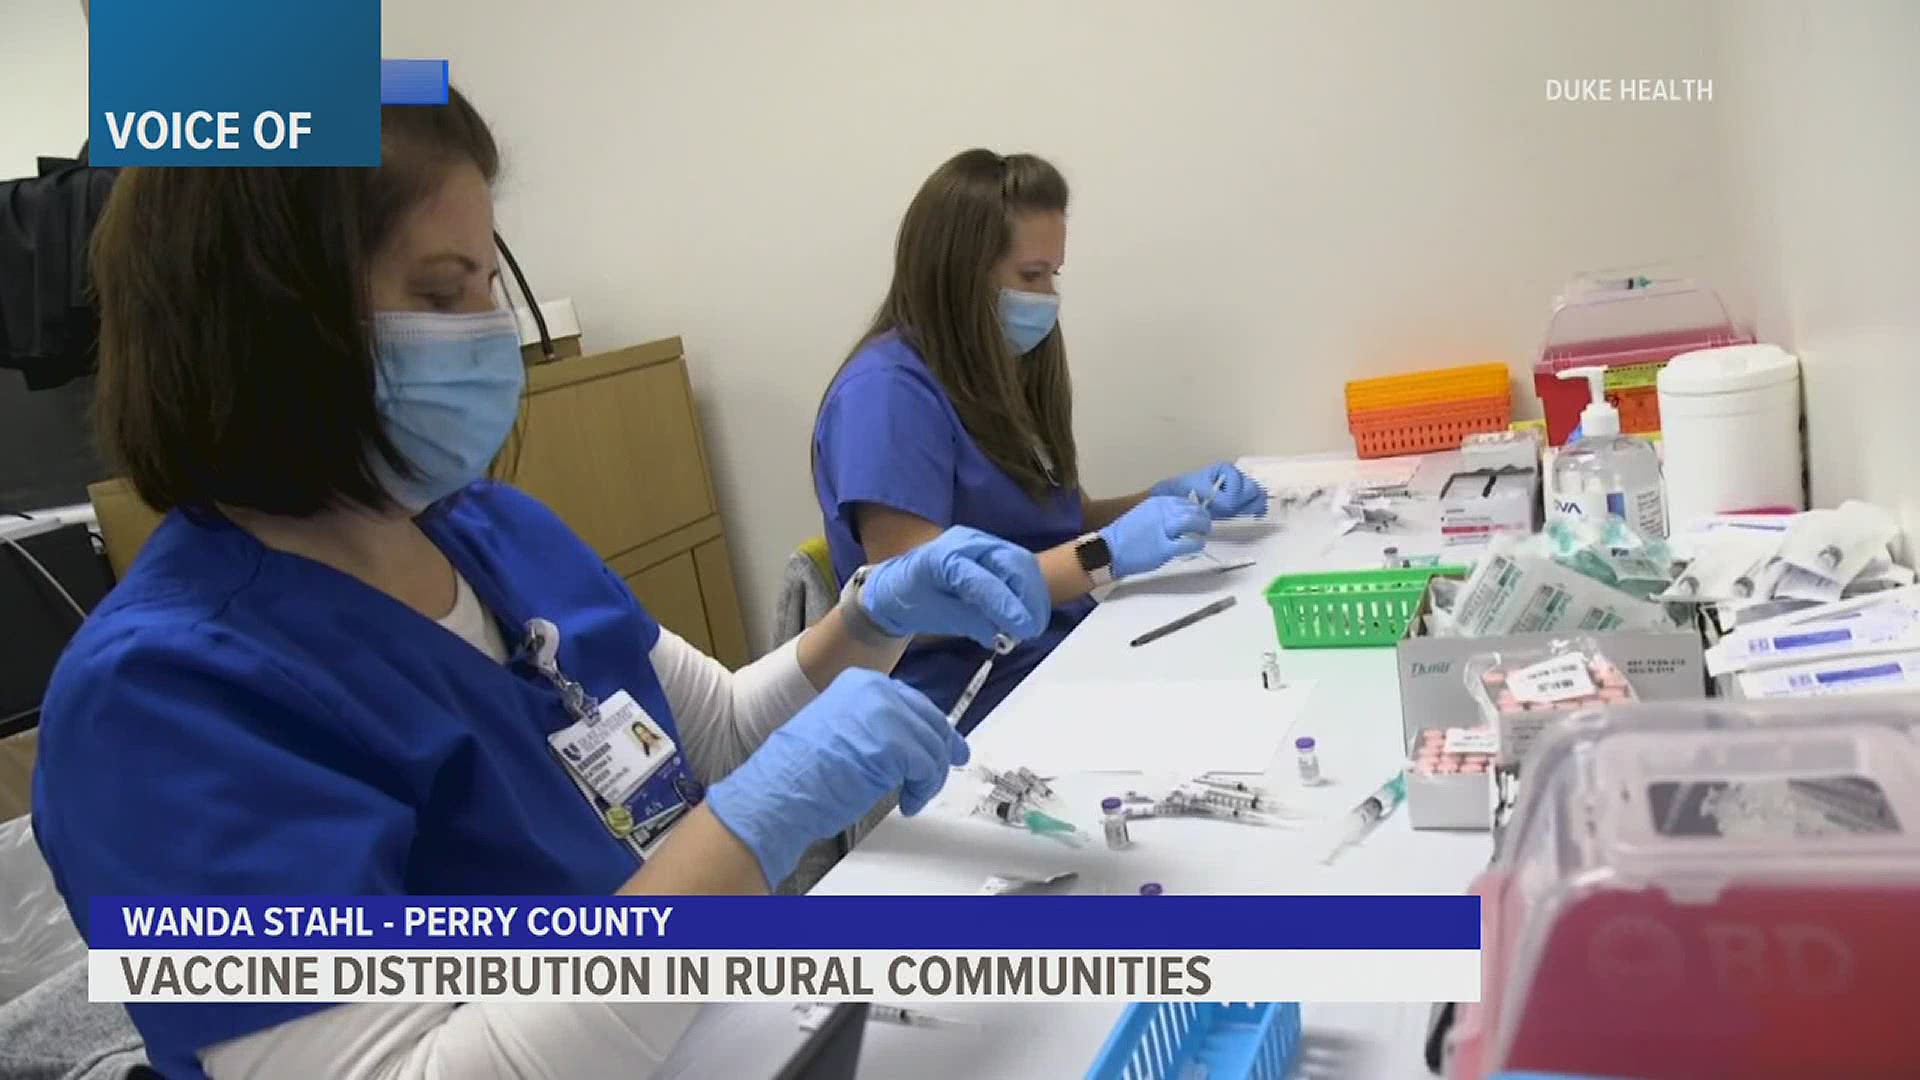 A study done by the CDC found a nearly 7% difference in COVID-19 vaccination rates between rural and urban counties.